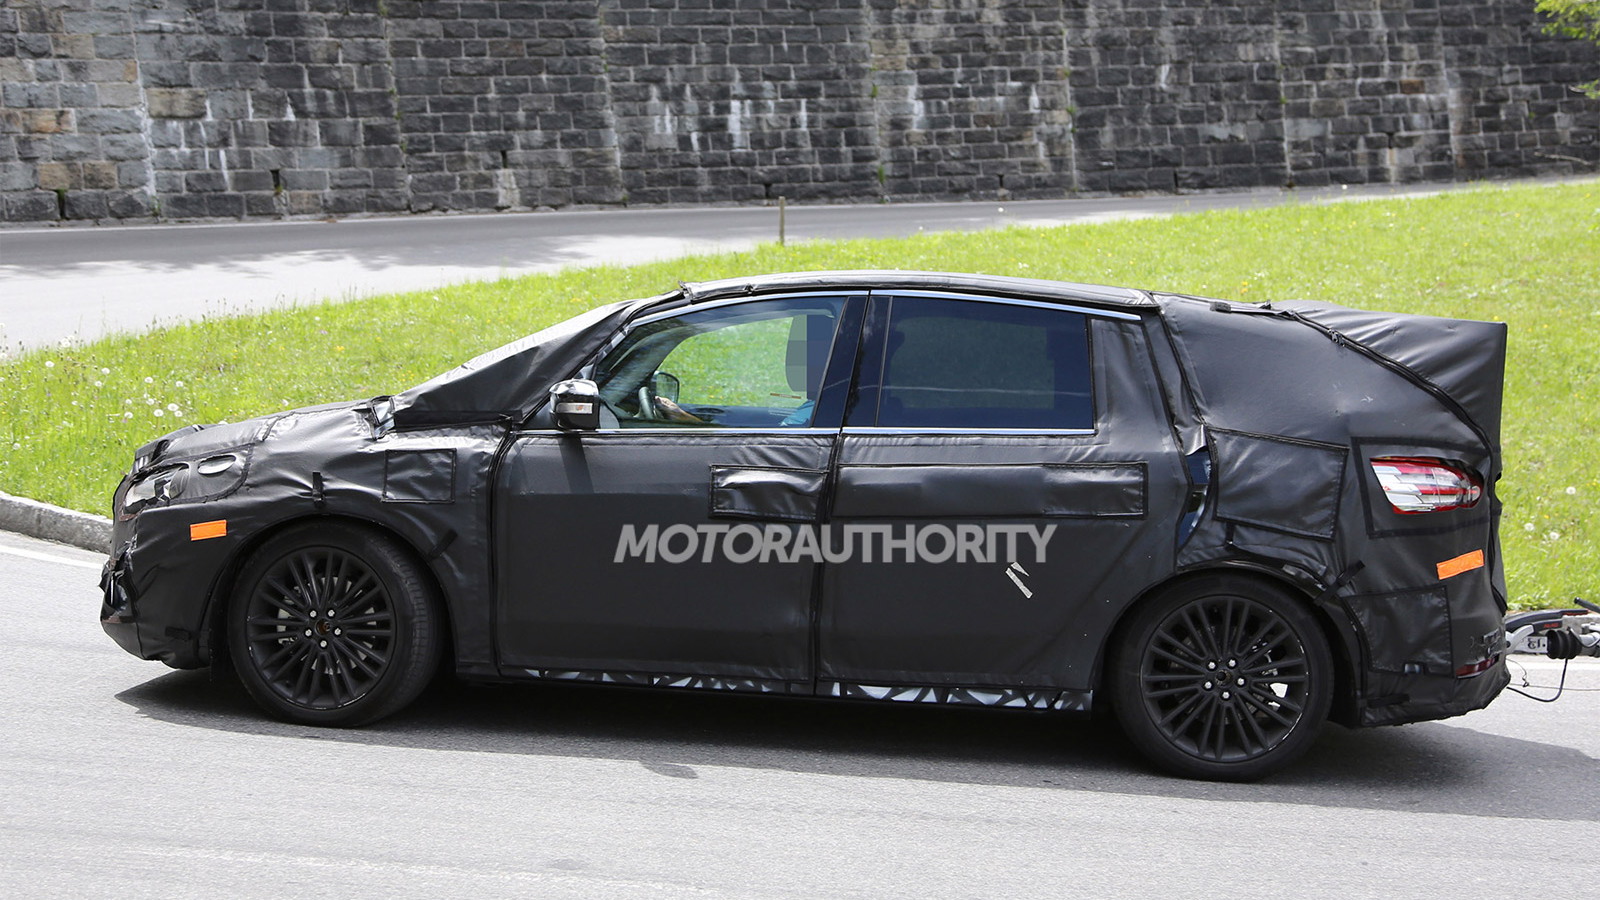 2015 Ford S-Max spy shots